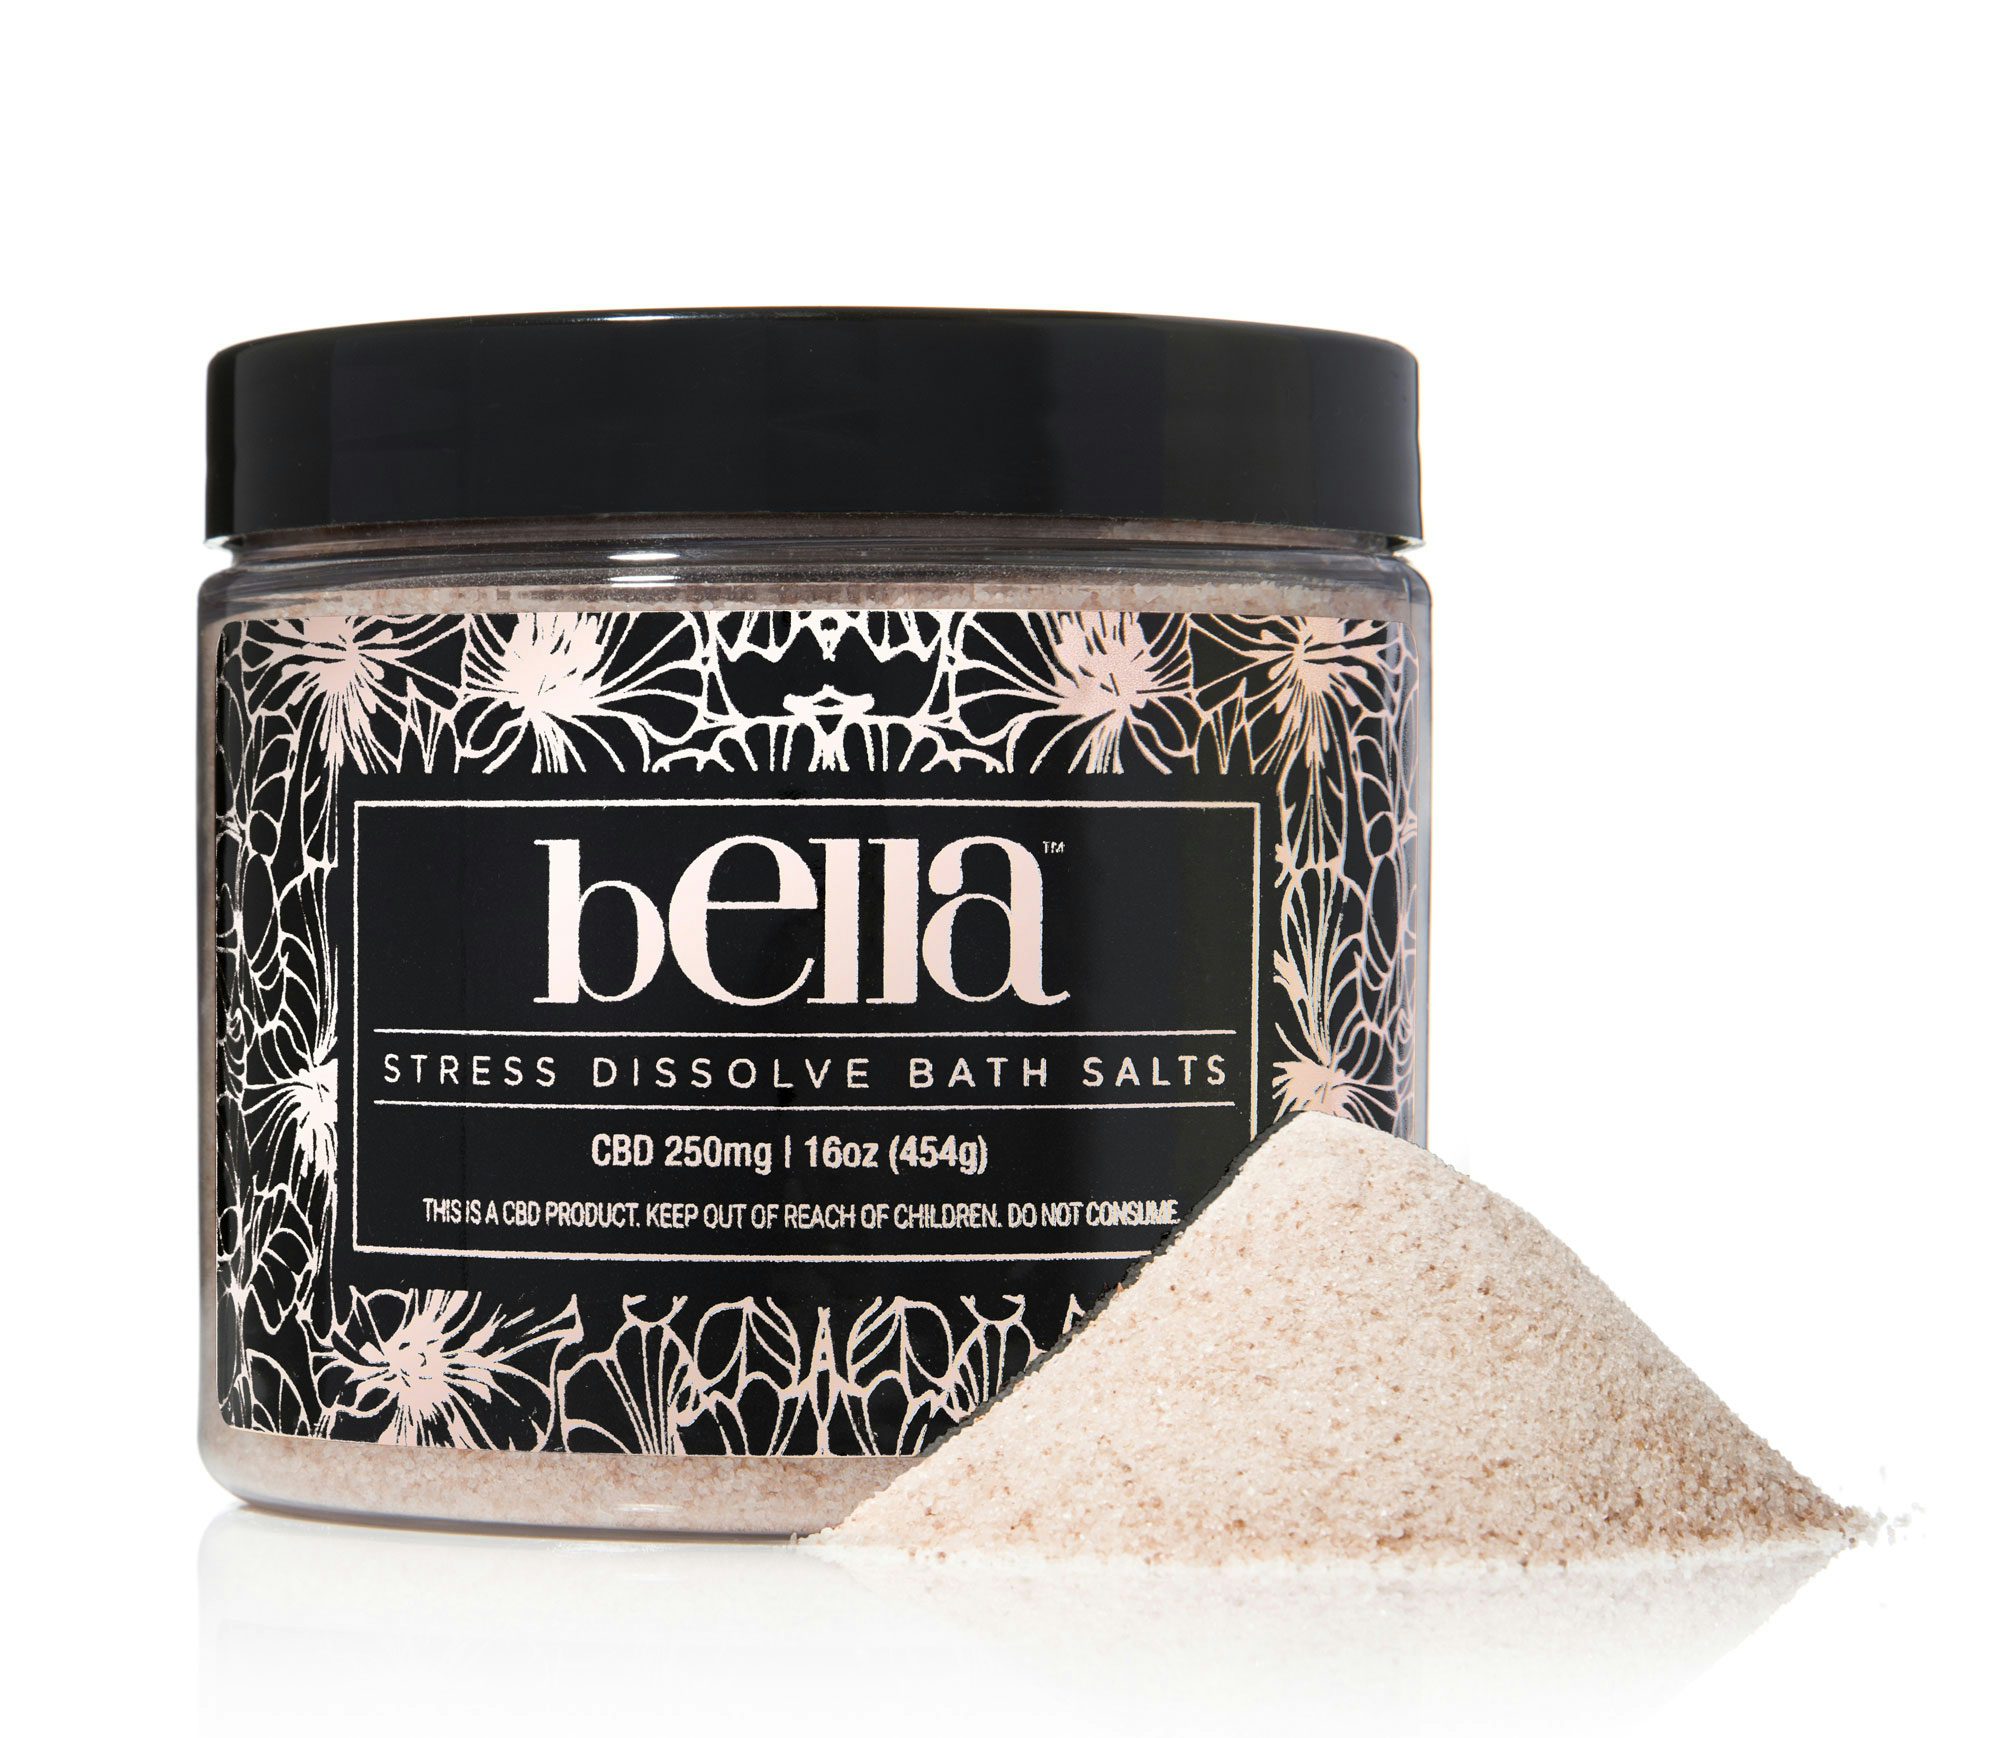 Bellabathsalt CBD lotion and skincare products could help you manage eczema and psoriasis